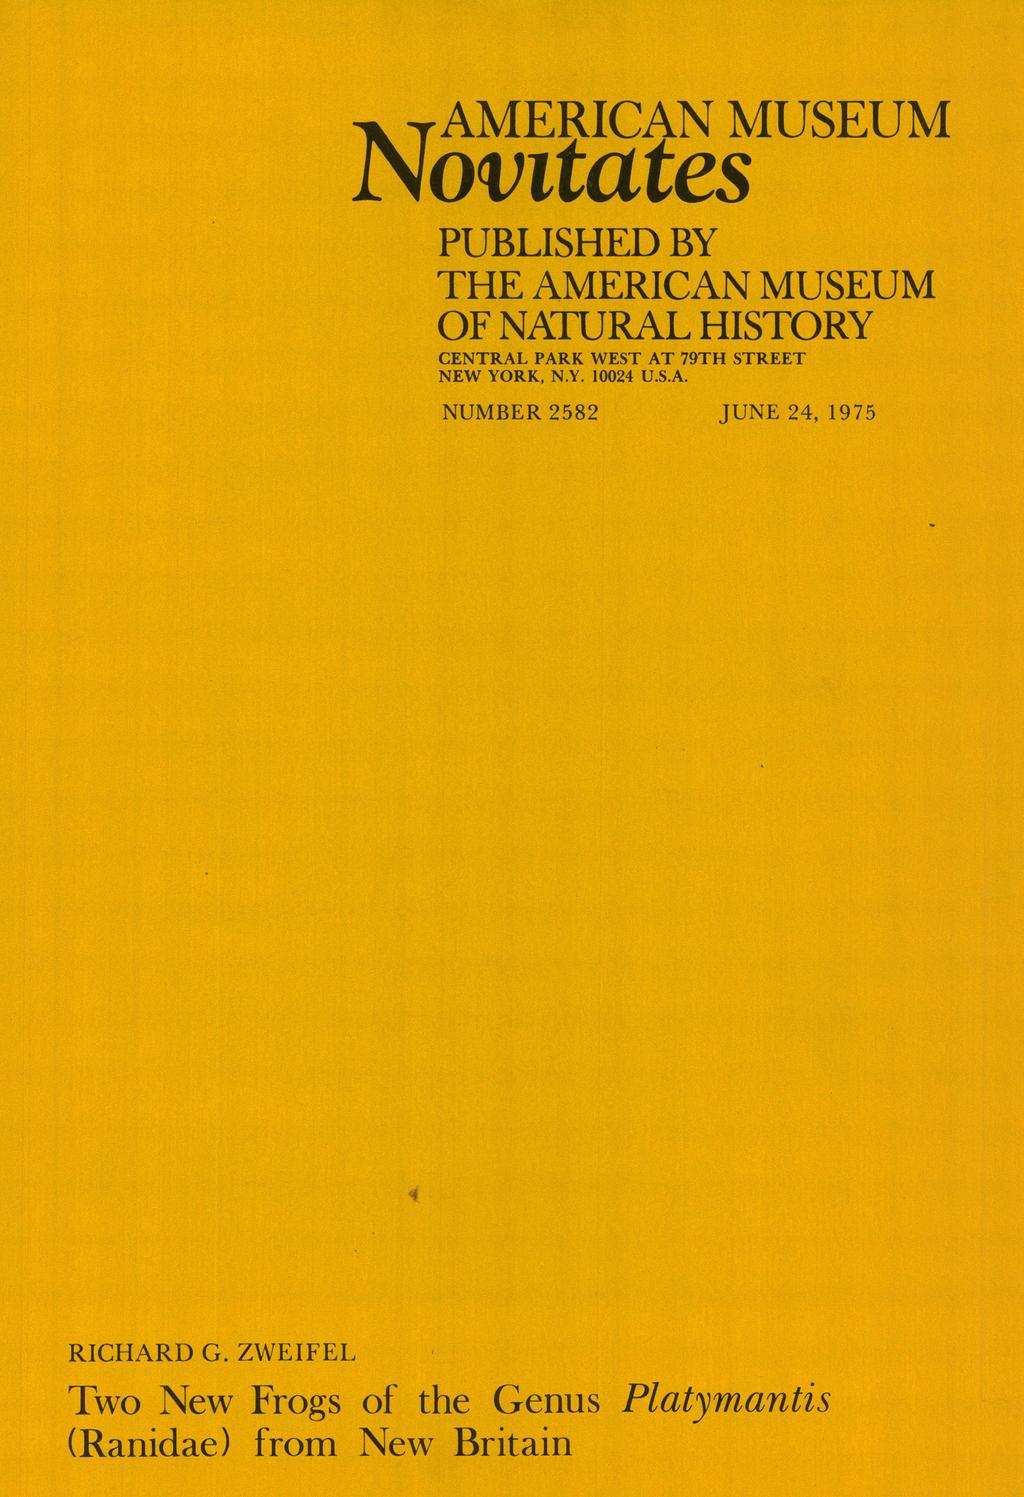 AMERICAN MUSEUM tta tes Nov PUBLISHED BY THE AMERICAN MUSEUM NATURAL HISTORY OF CENTRAL PARK WEST AT 79TH STREET NEW YORK, N.